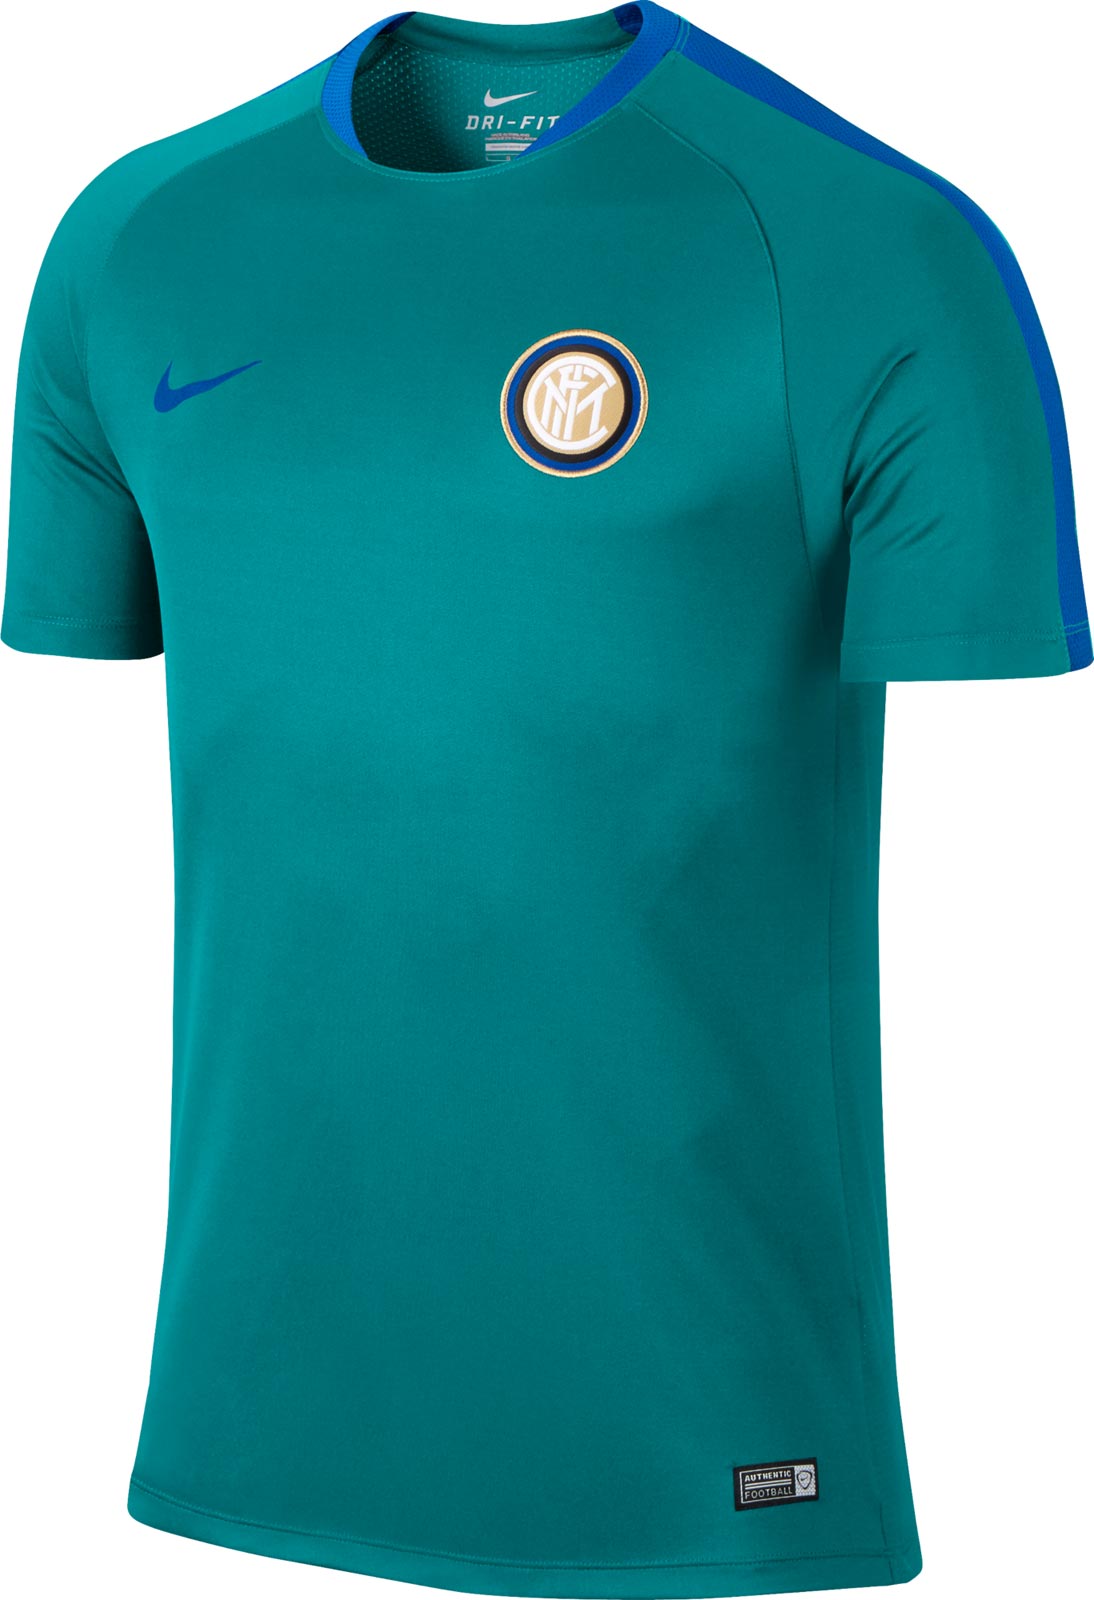 Inter Milan 2016 Training and Pre-Match Shirts Released - Footy Headlines